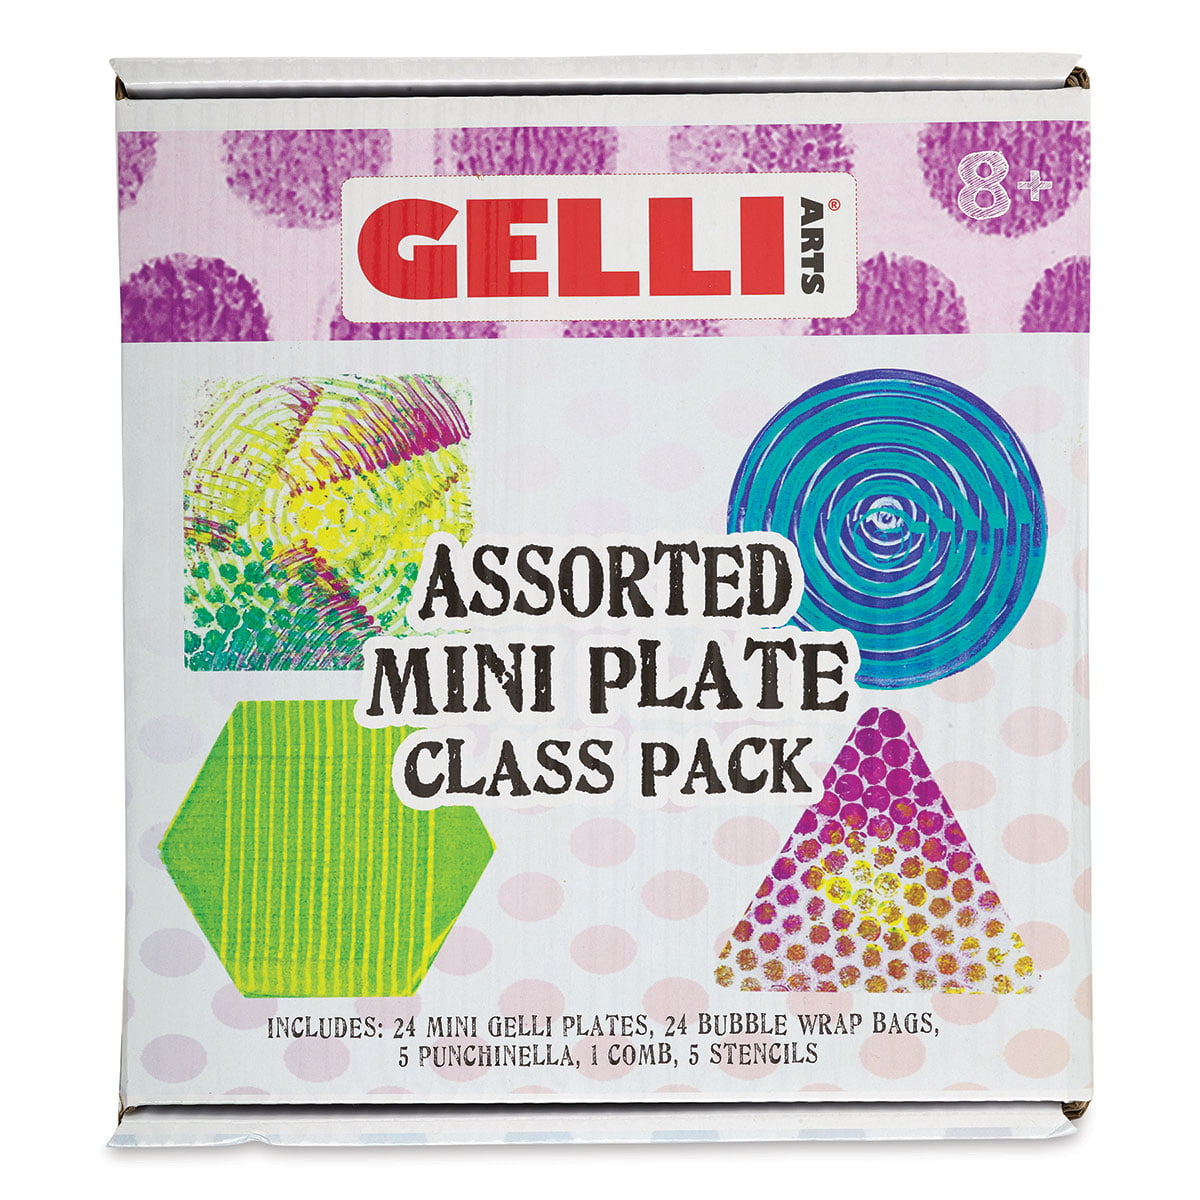 Gelli Arts 5 x 5 x 0.25 in. Student Printing Plate 10 Pieces - Pack of